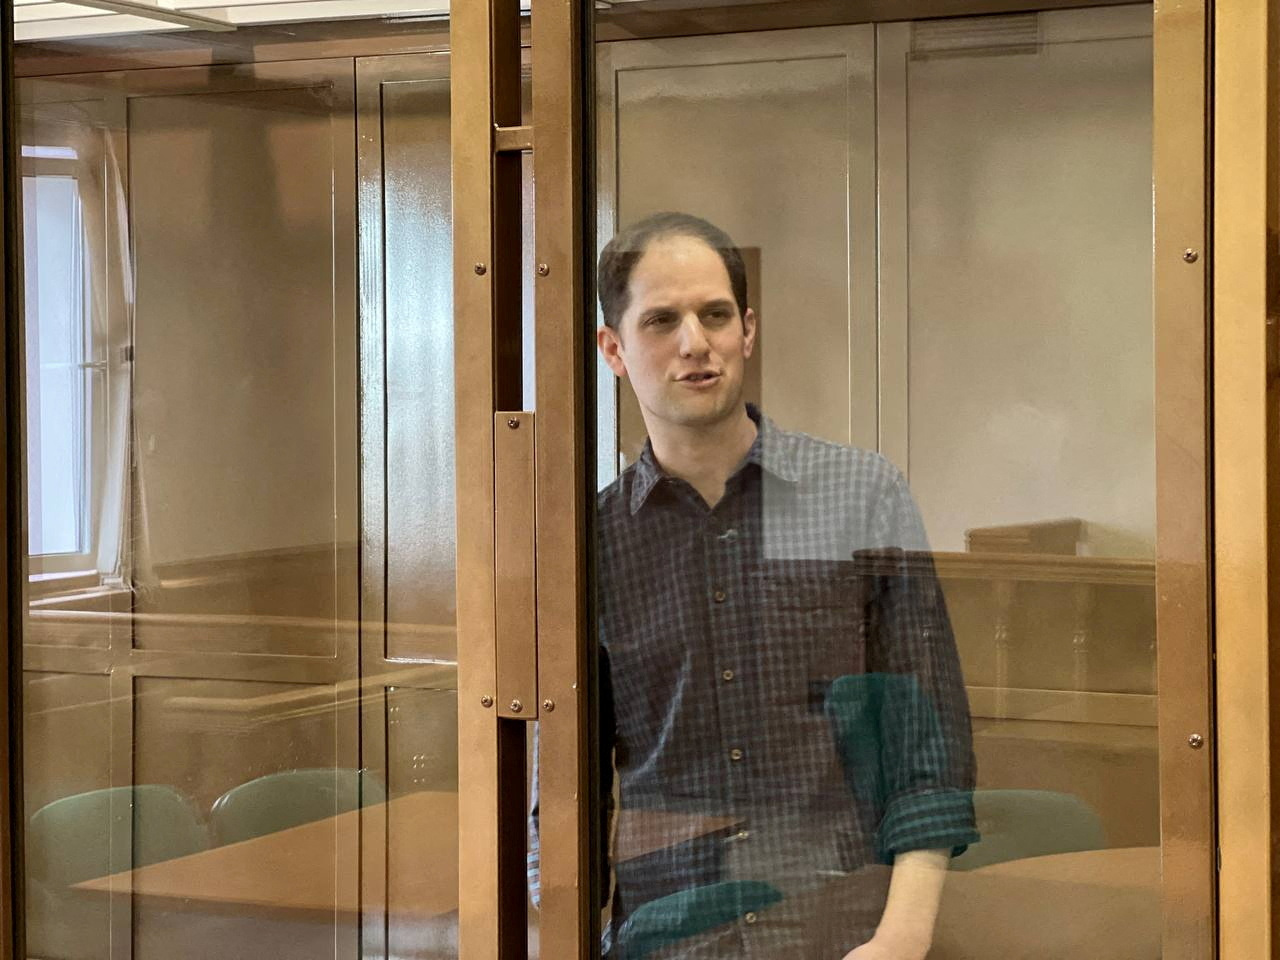 Wall Street Journal reporter Evan Gershkovich stands behind a glass wall of an enclosure for defendants as he attends a court hearing to consider extending his detention in Moscow